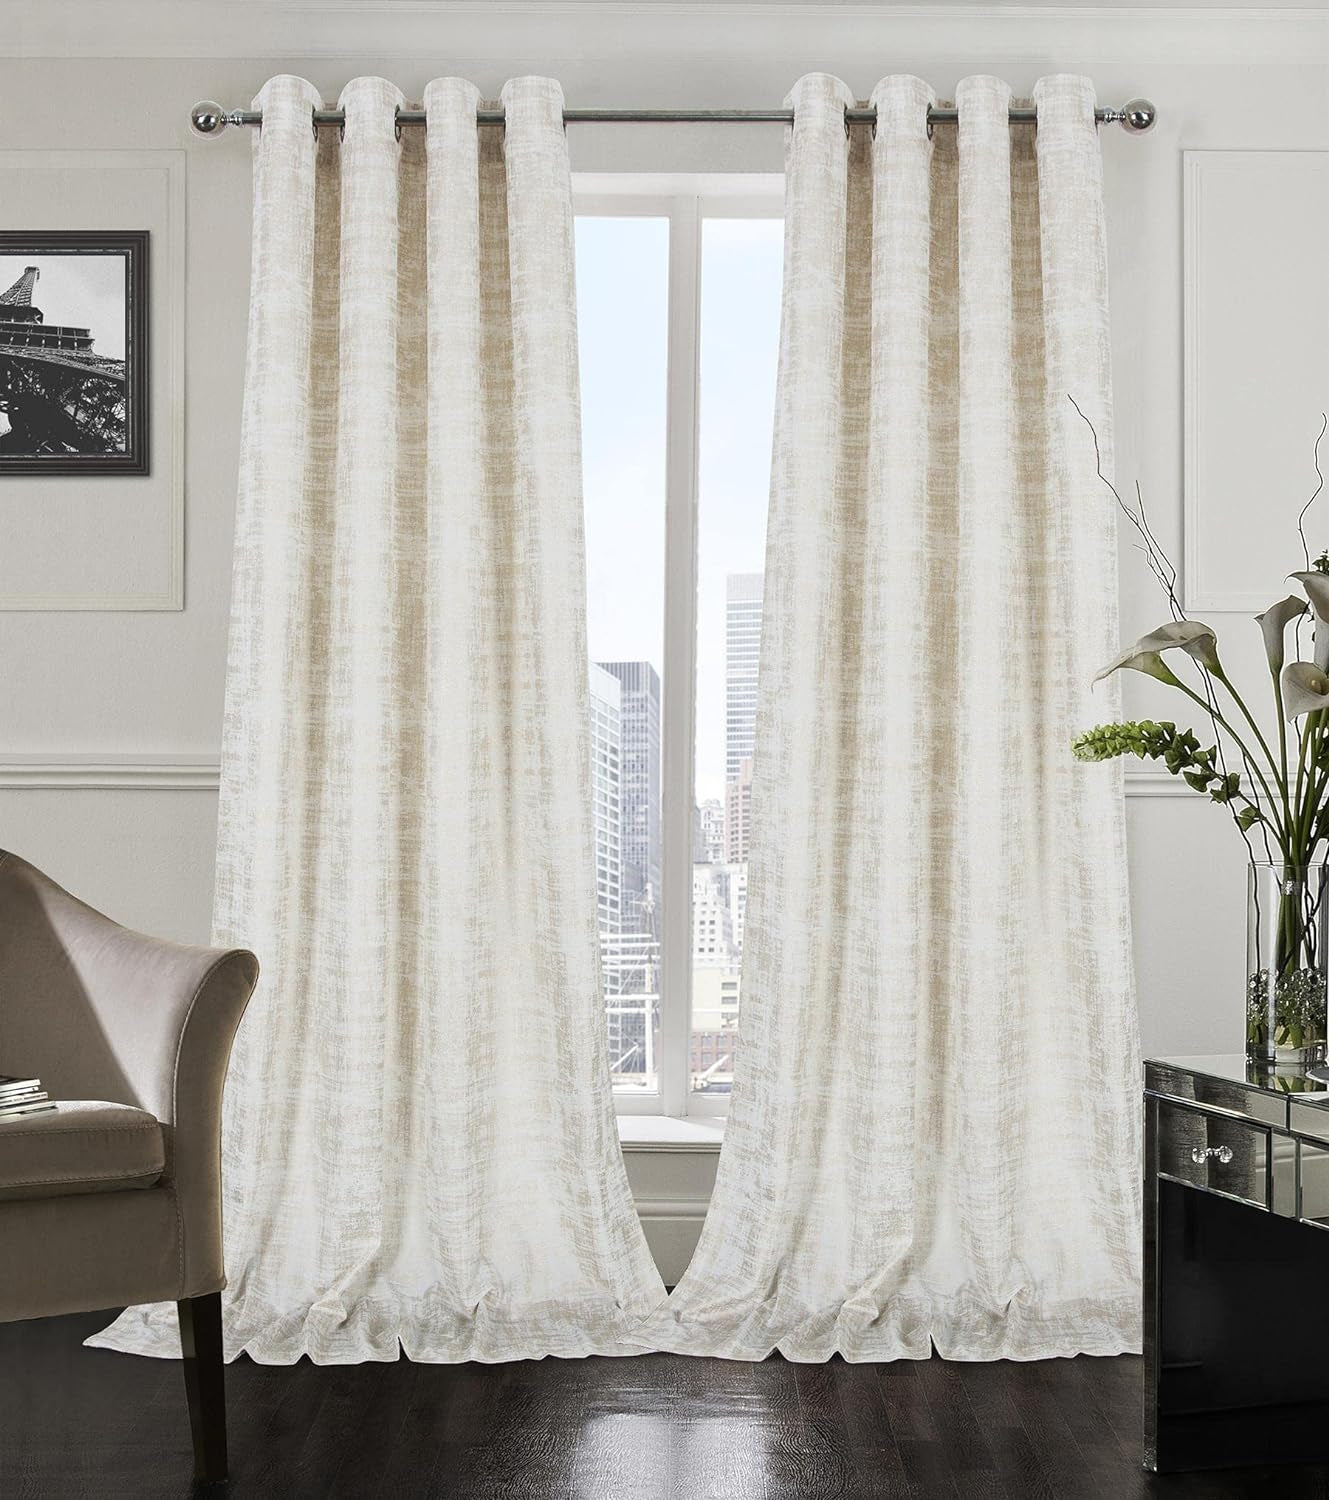 Always4U Soft Velvet Curtains 95 Inch Length Luxury Bedroom Curtains Gold Foil Print Window Curtains for Living Room 1 Panel White  always4u White (Gold Print) 2 Panels: 52''W*120''L 